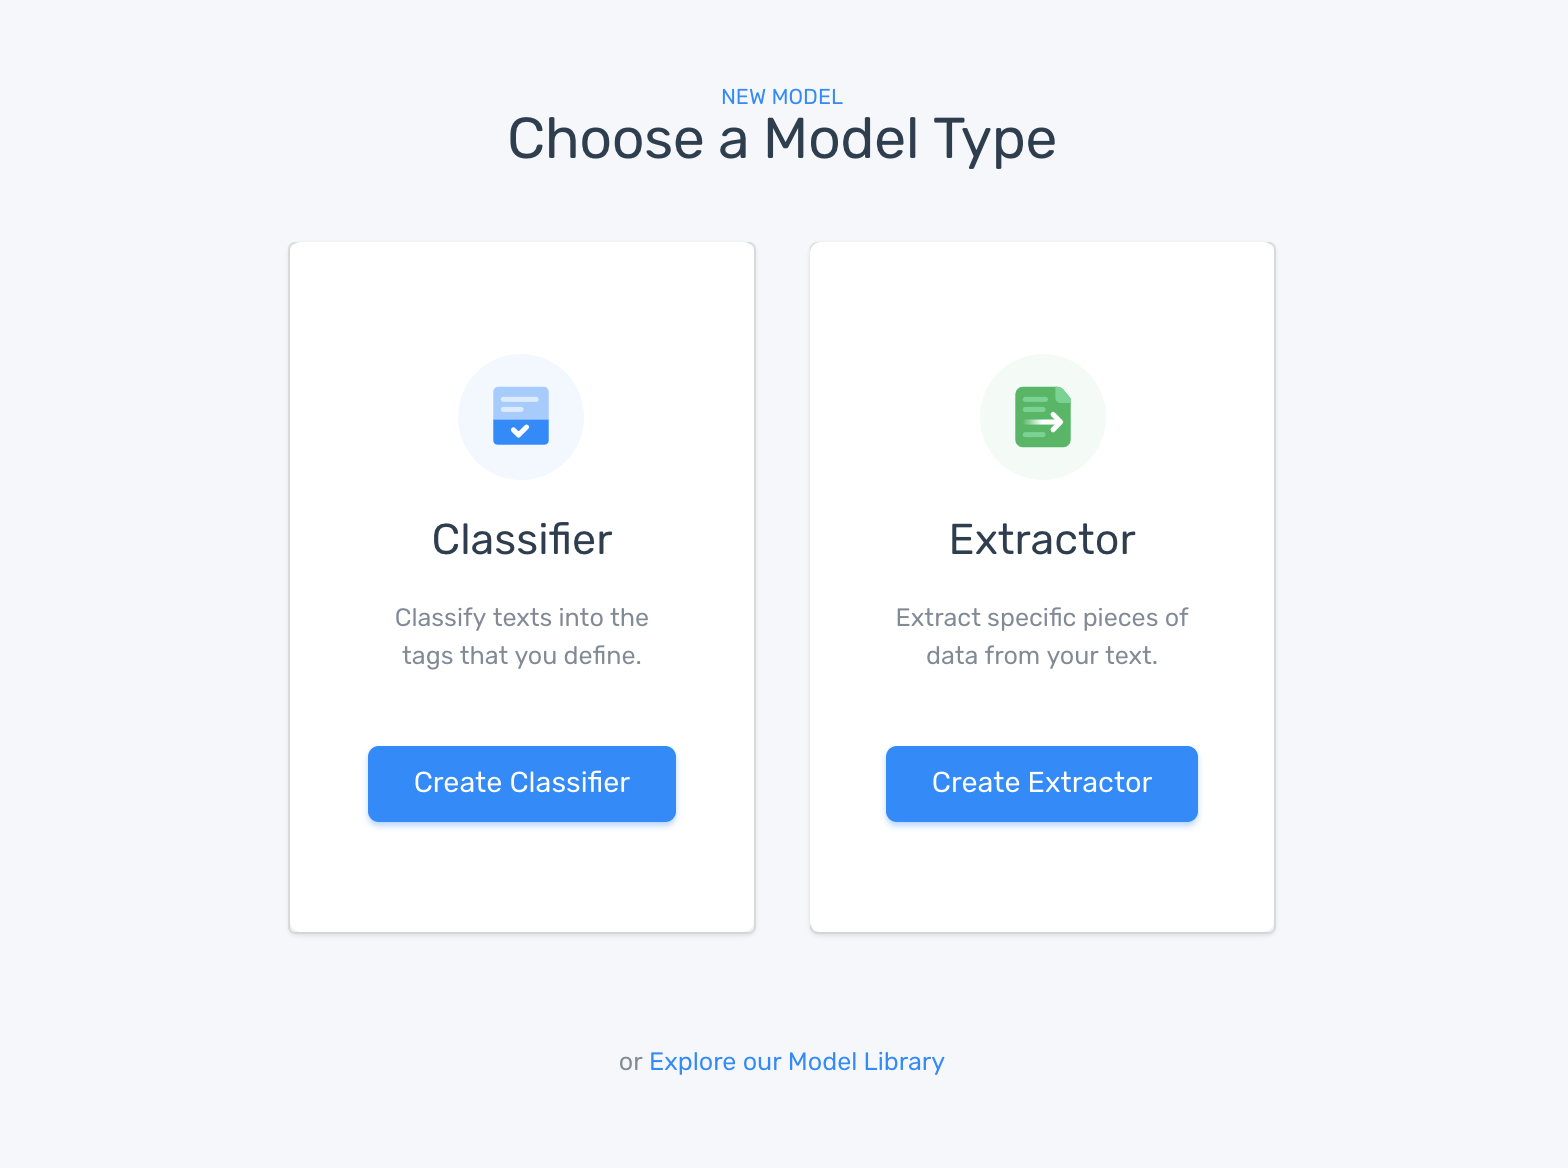 Creating a Model on MonkeyLearn